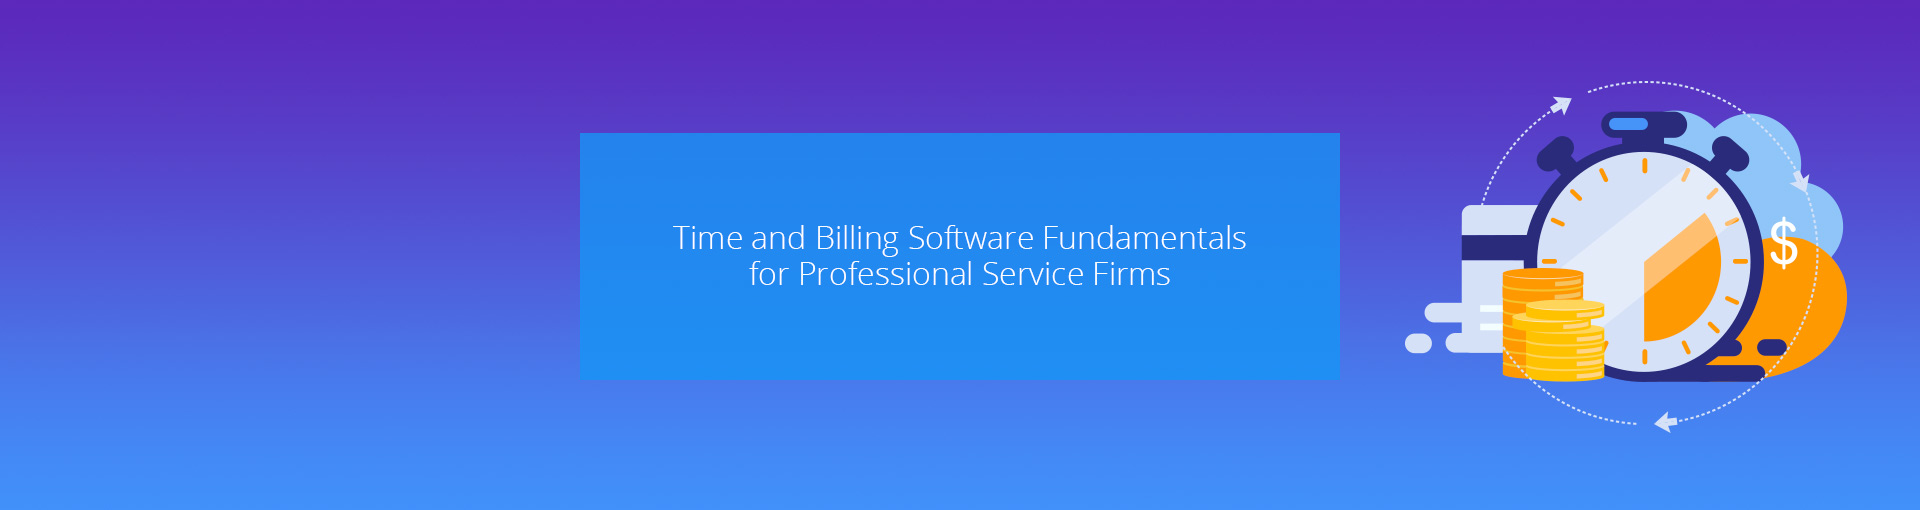 Time and Billing Software Fundamentals for Professional Service Firms Featured Image